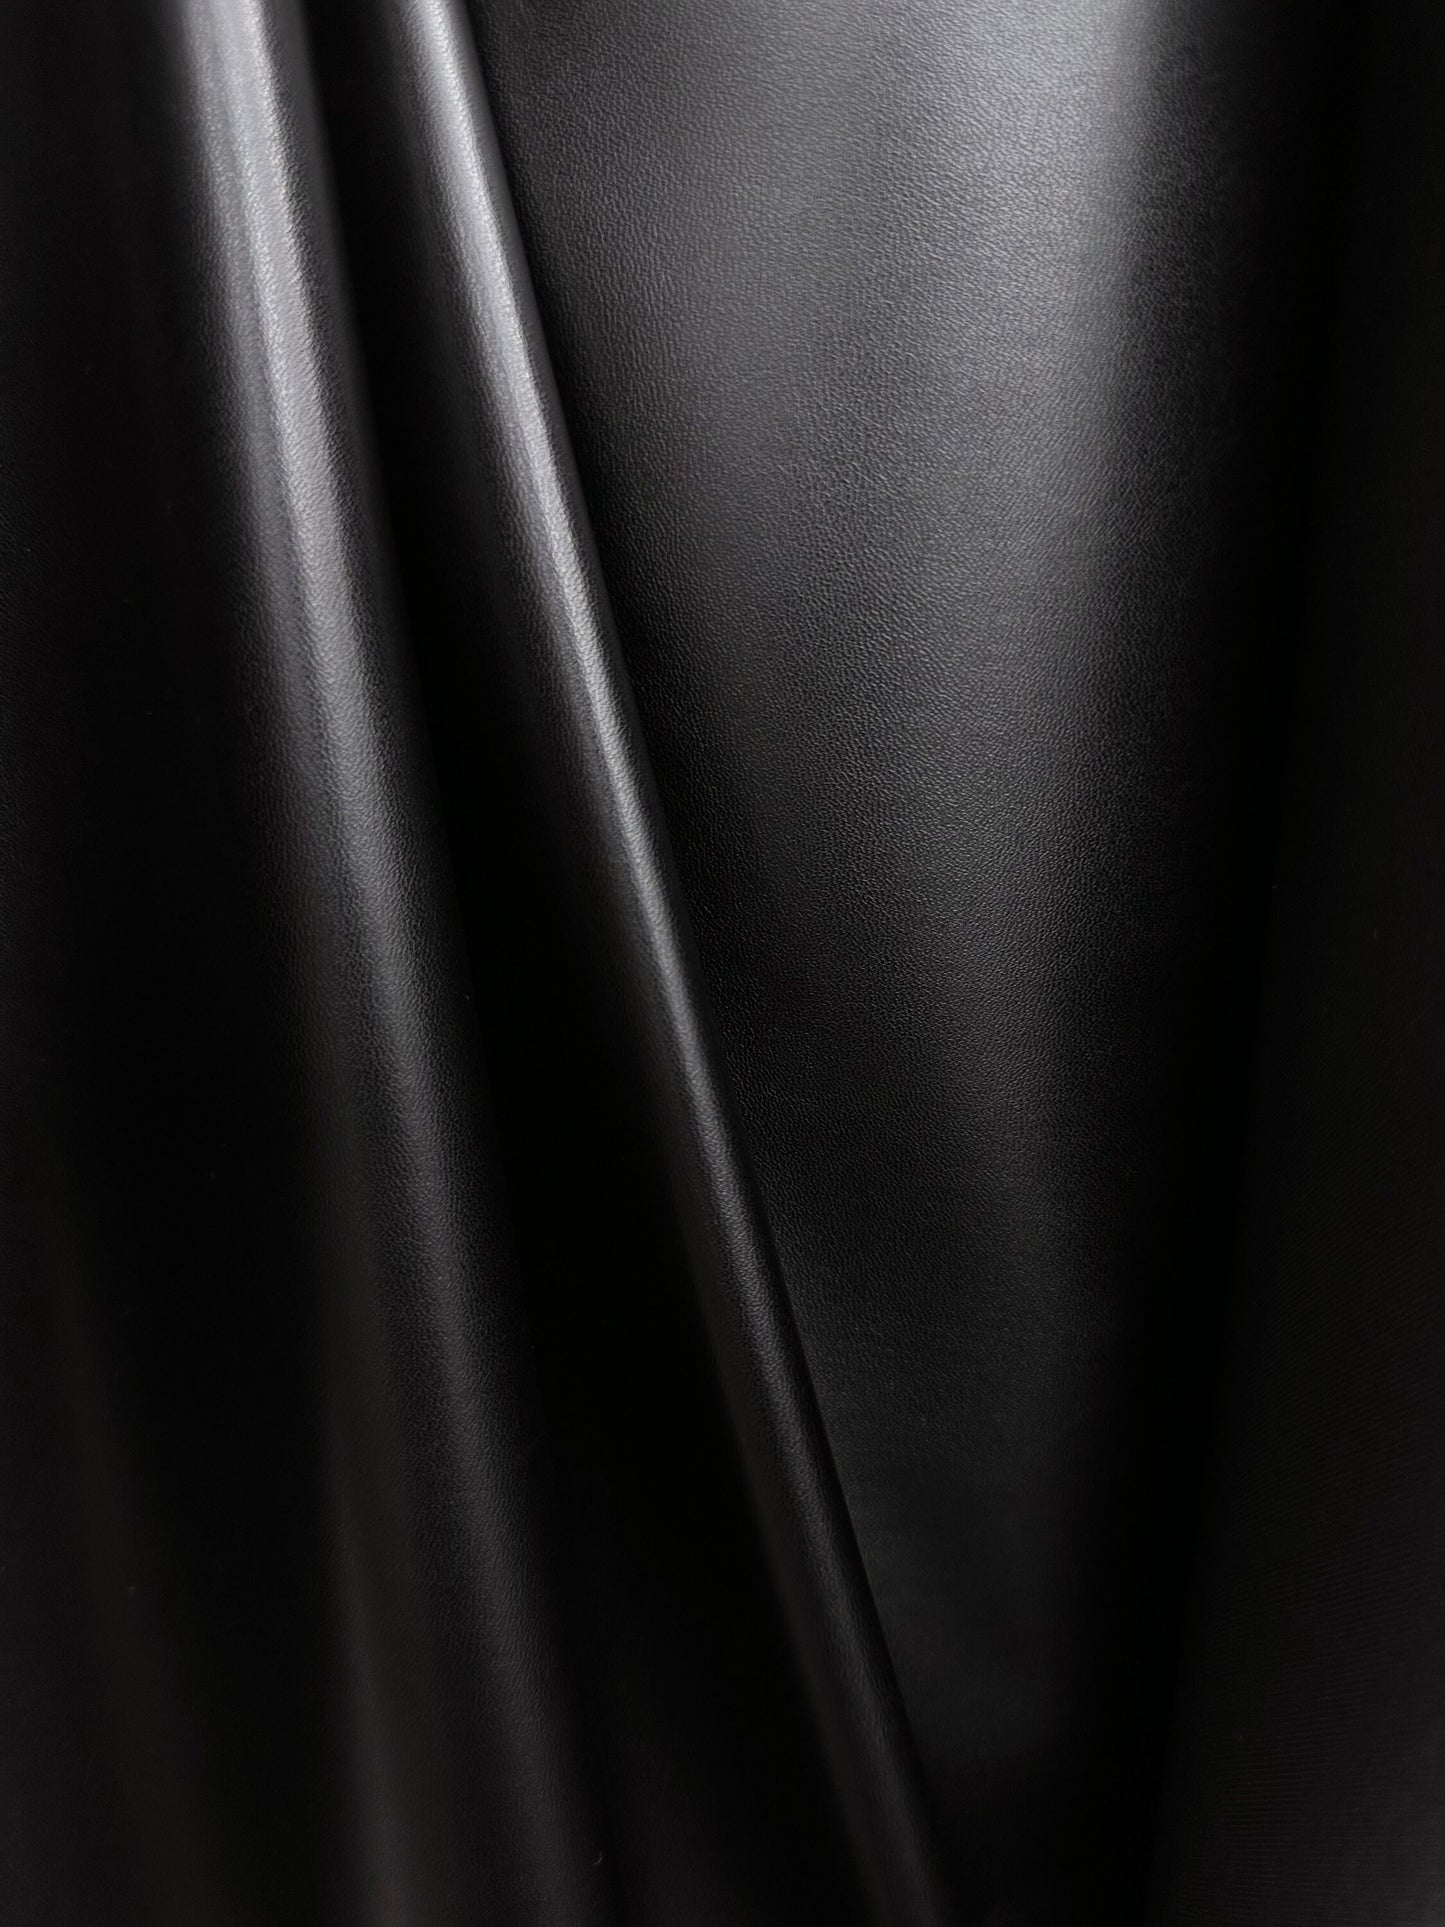 BLACK Pleather Stretch Fabric (56 in.) Sold By The Yard